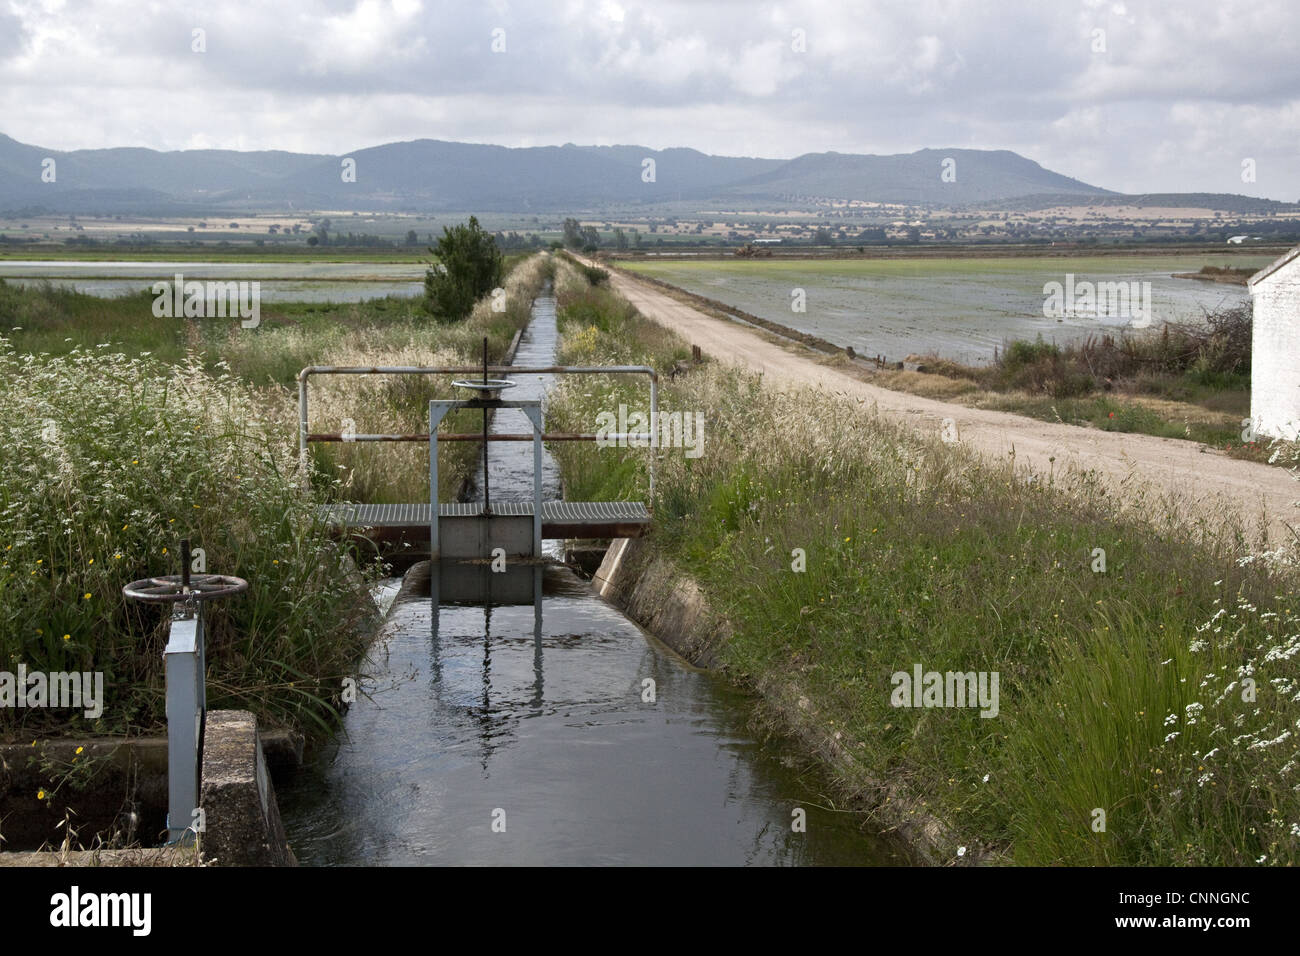 Irrigation channel flows from sluice gate to bring water to rice paddy fields, southern Spain. Stock Photo